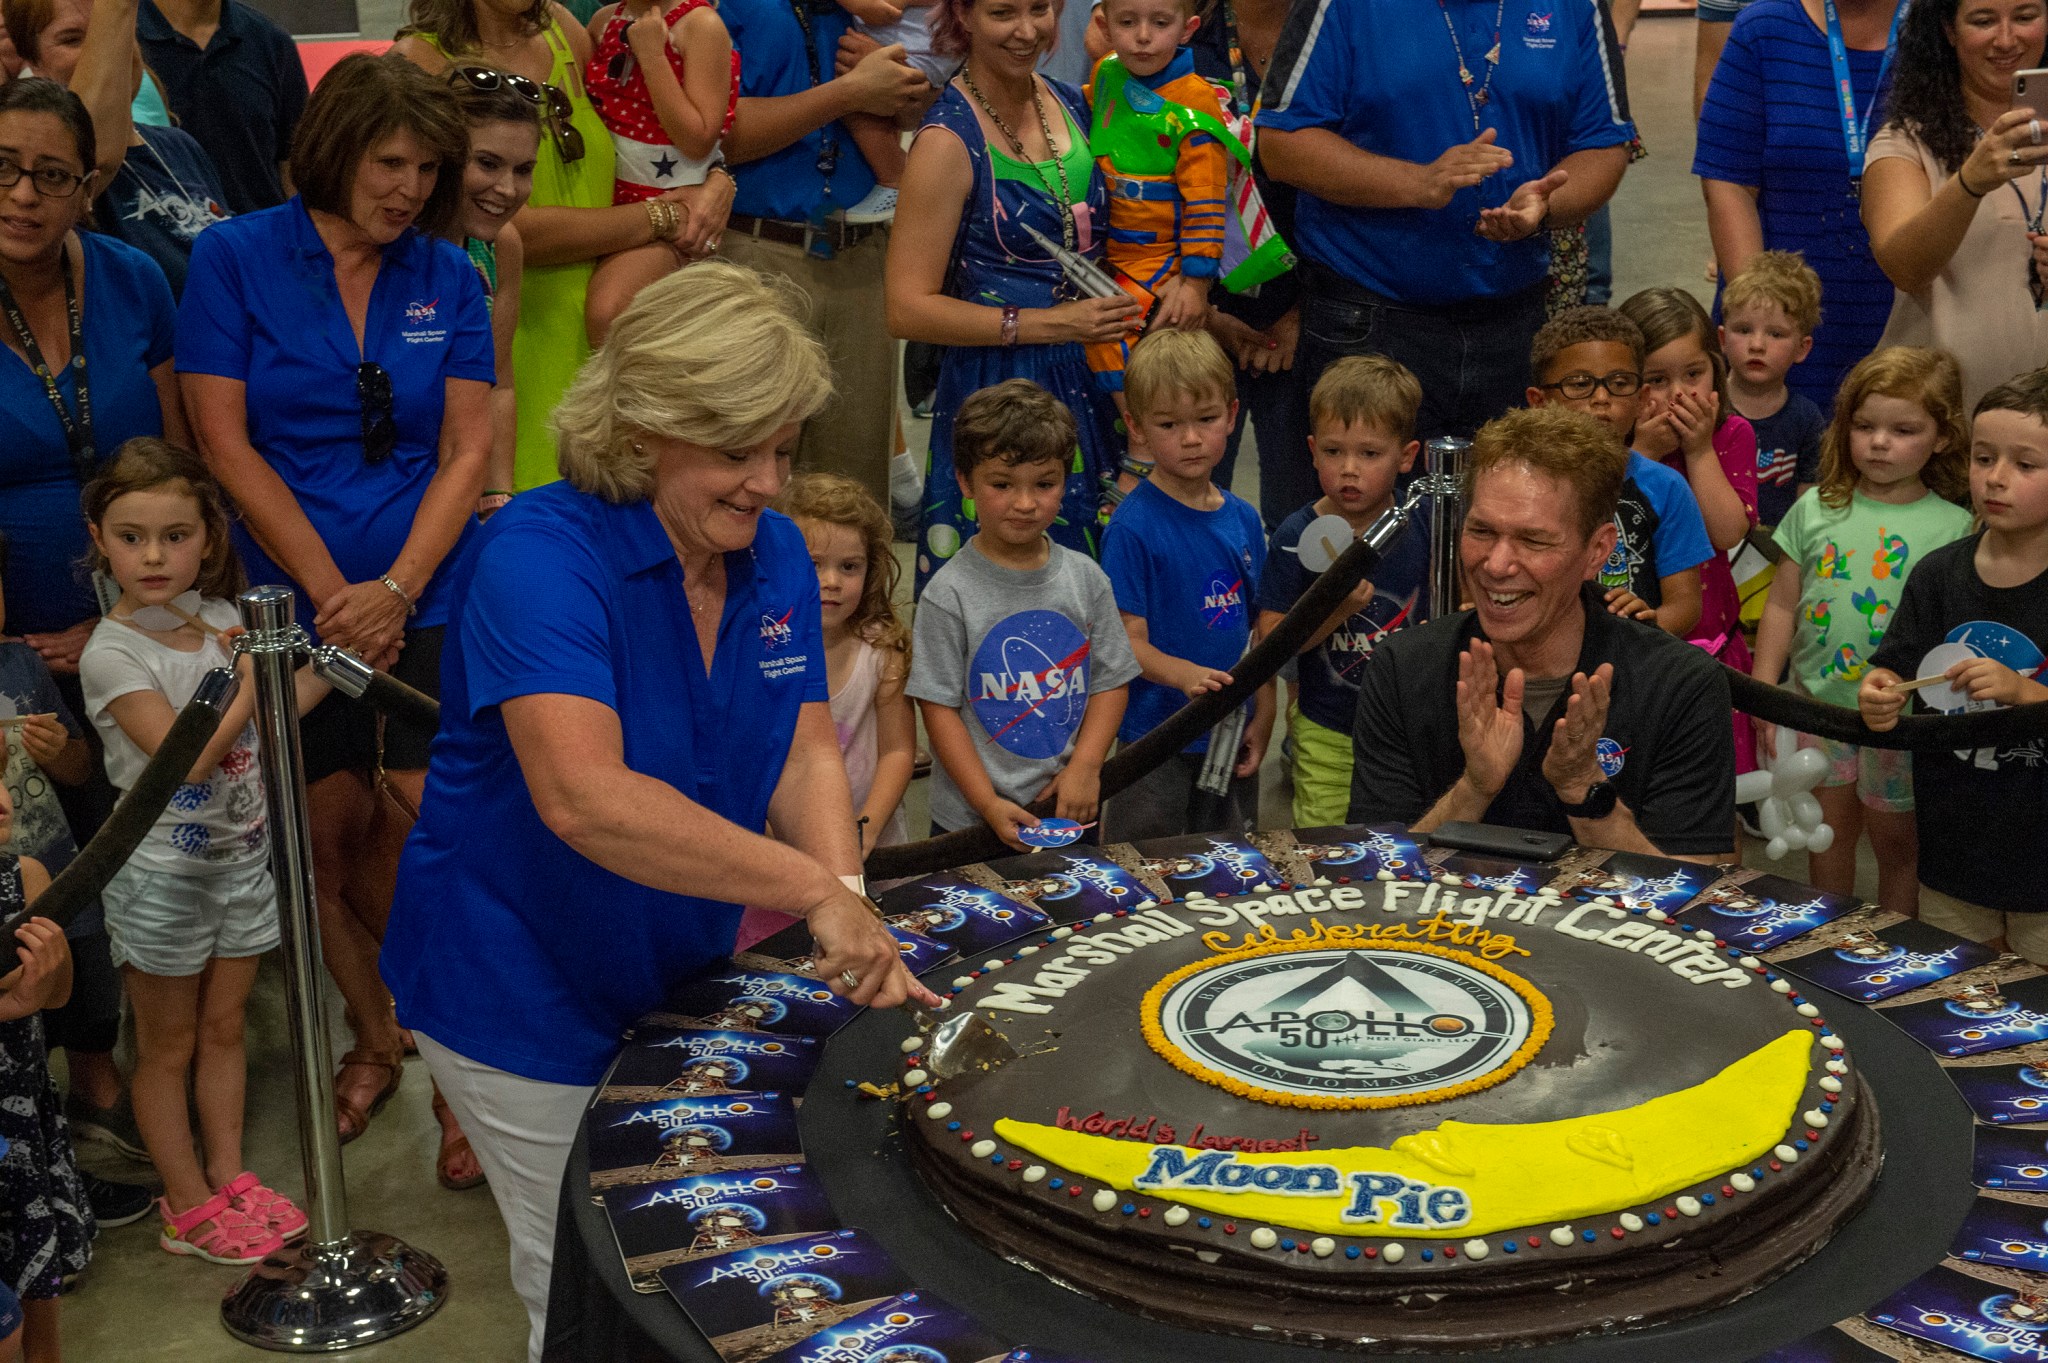 Marshall Director Jody Singer cuts a MoonPie measuring 4 feet in diameter, the largest ever made.